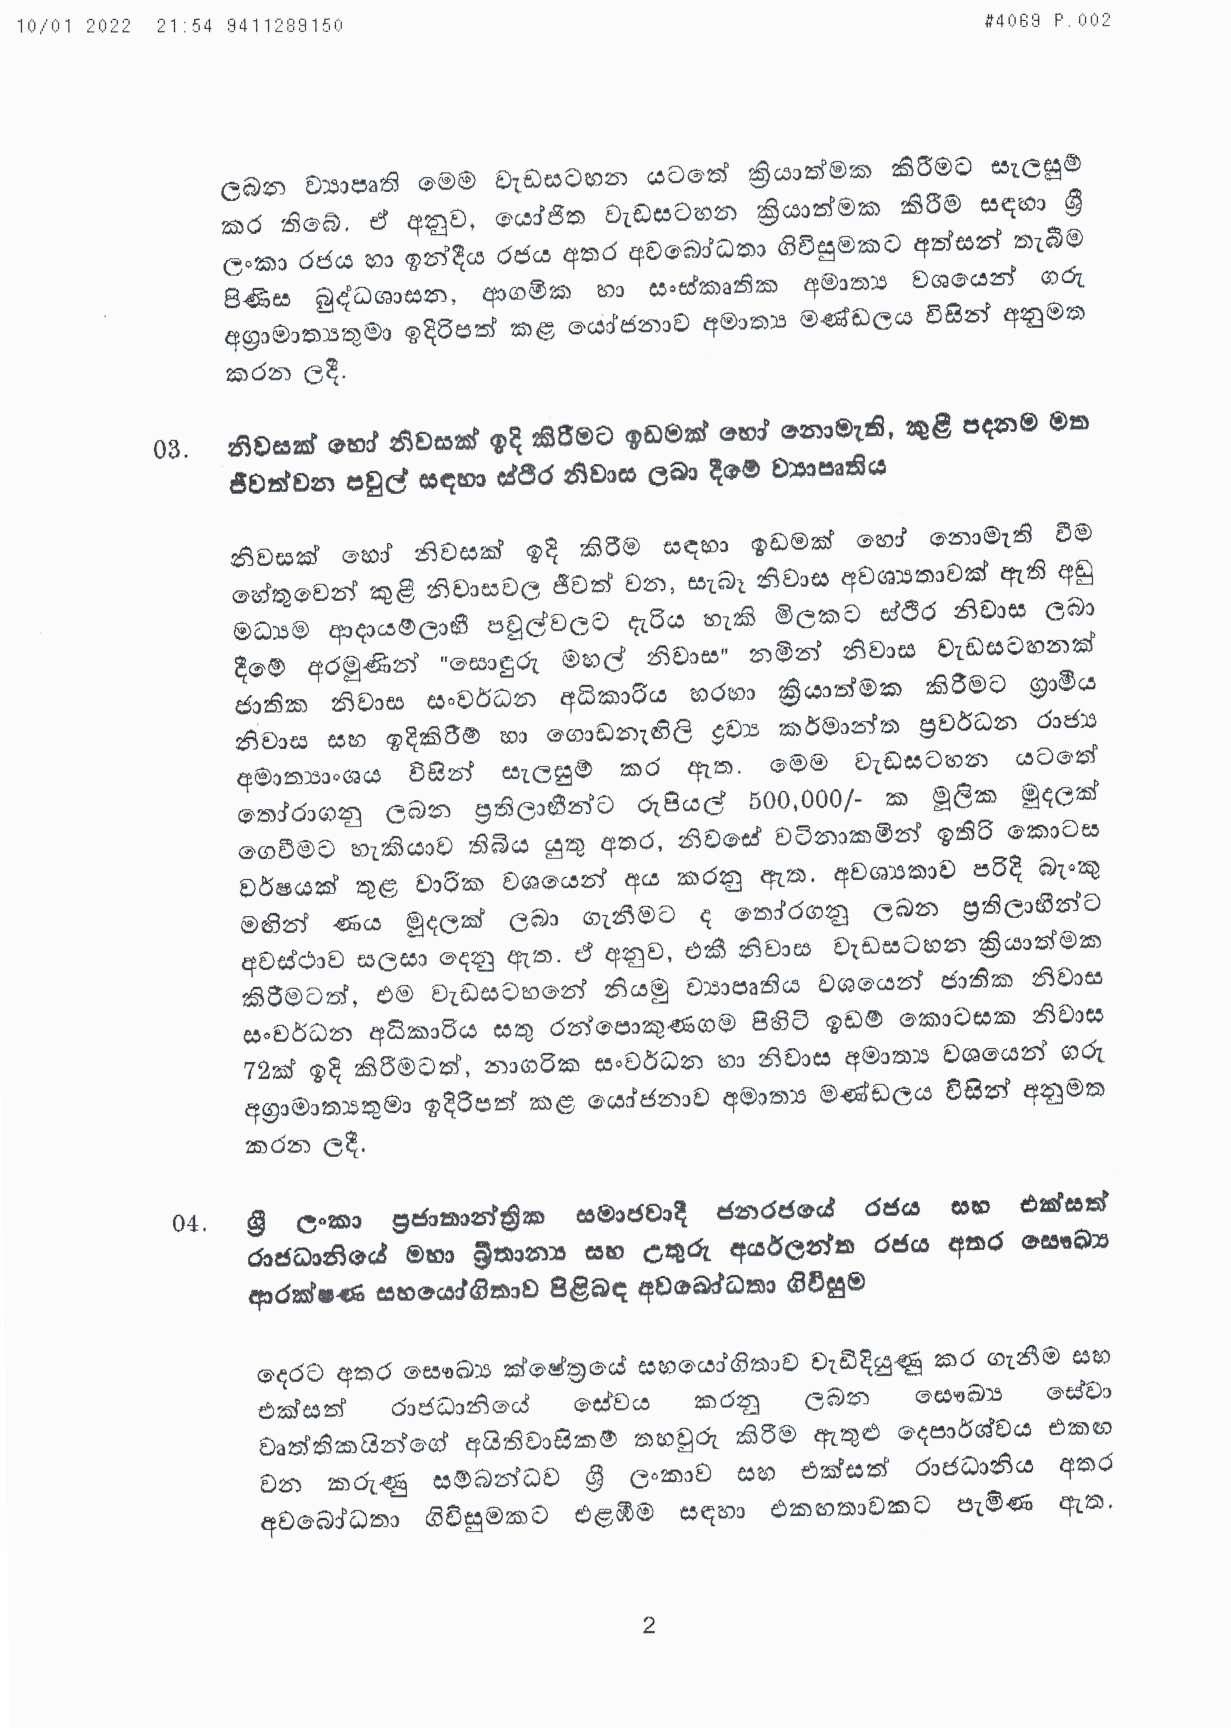 Cabinet Decision on 10.01.2022 page 002